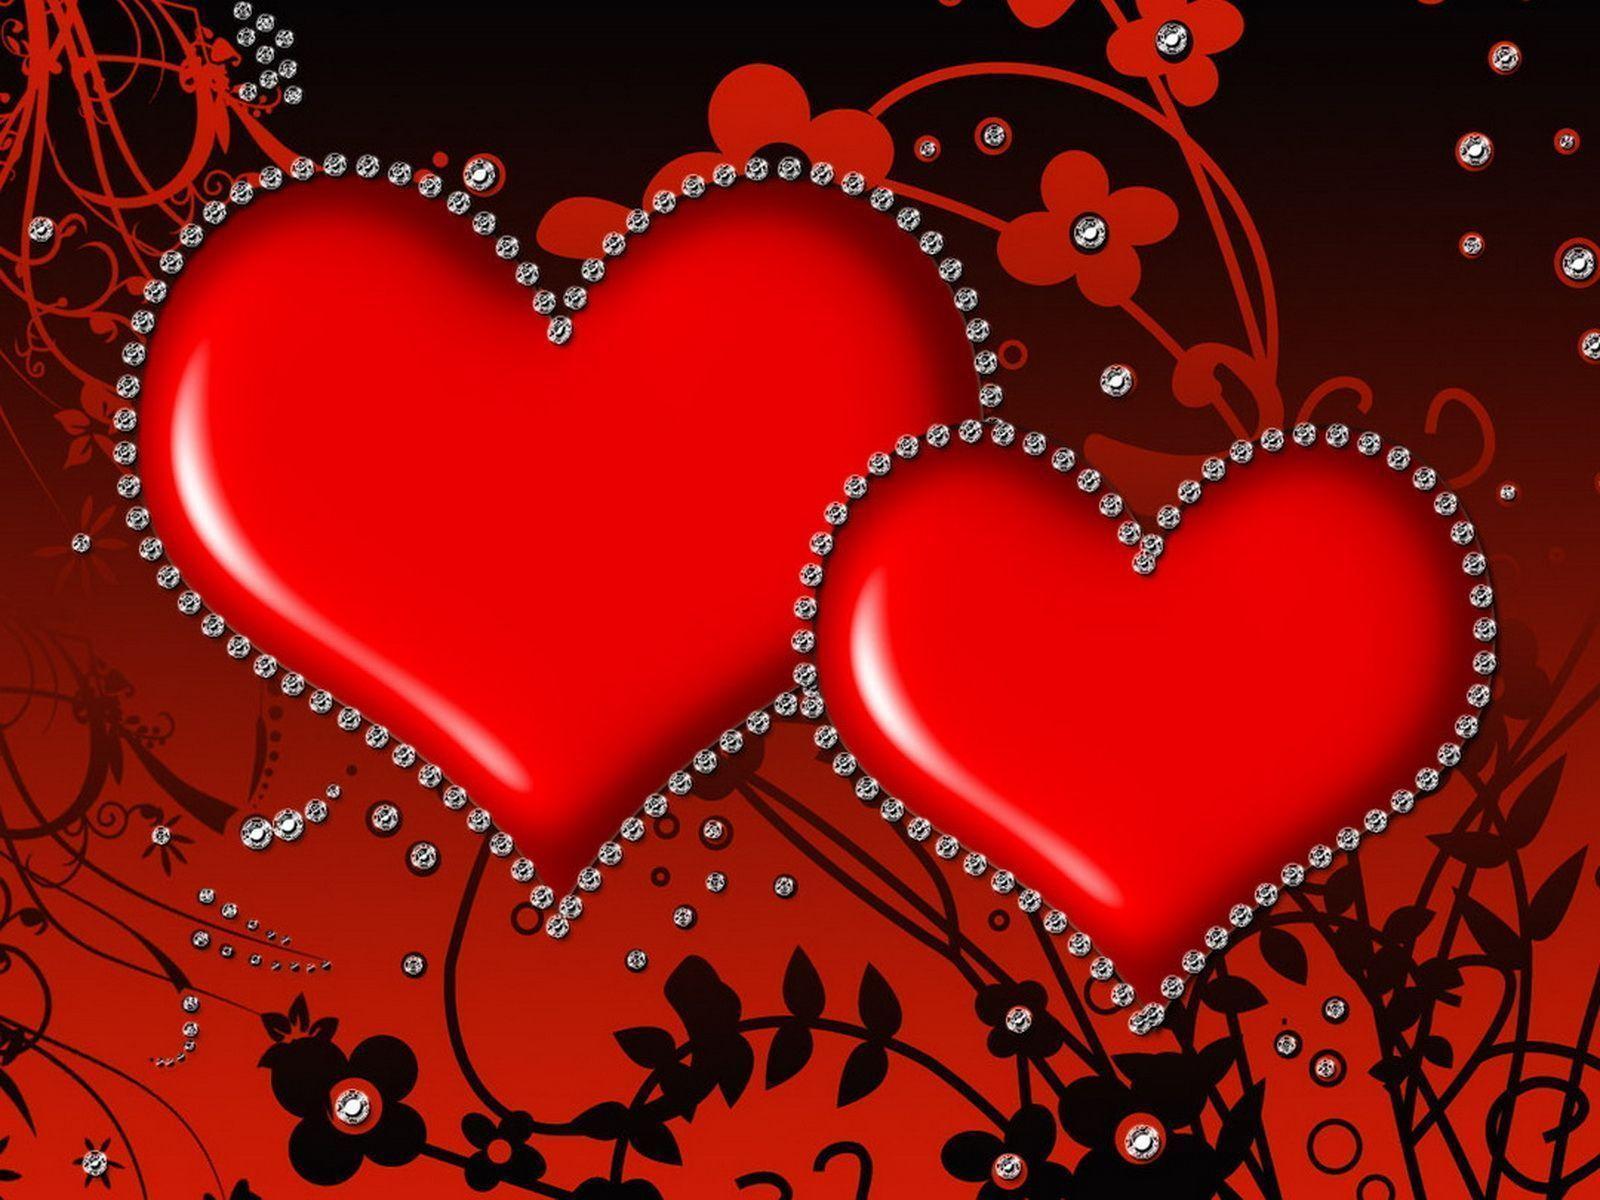 Loving Heart wallpaper and image, picture, photo